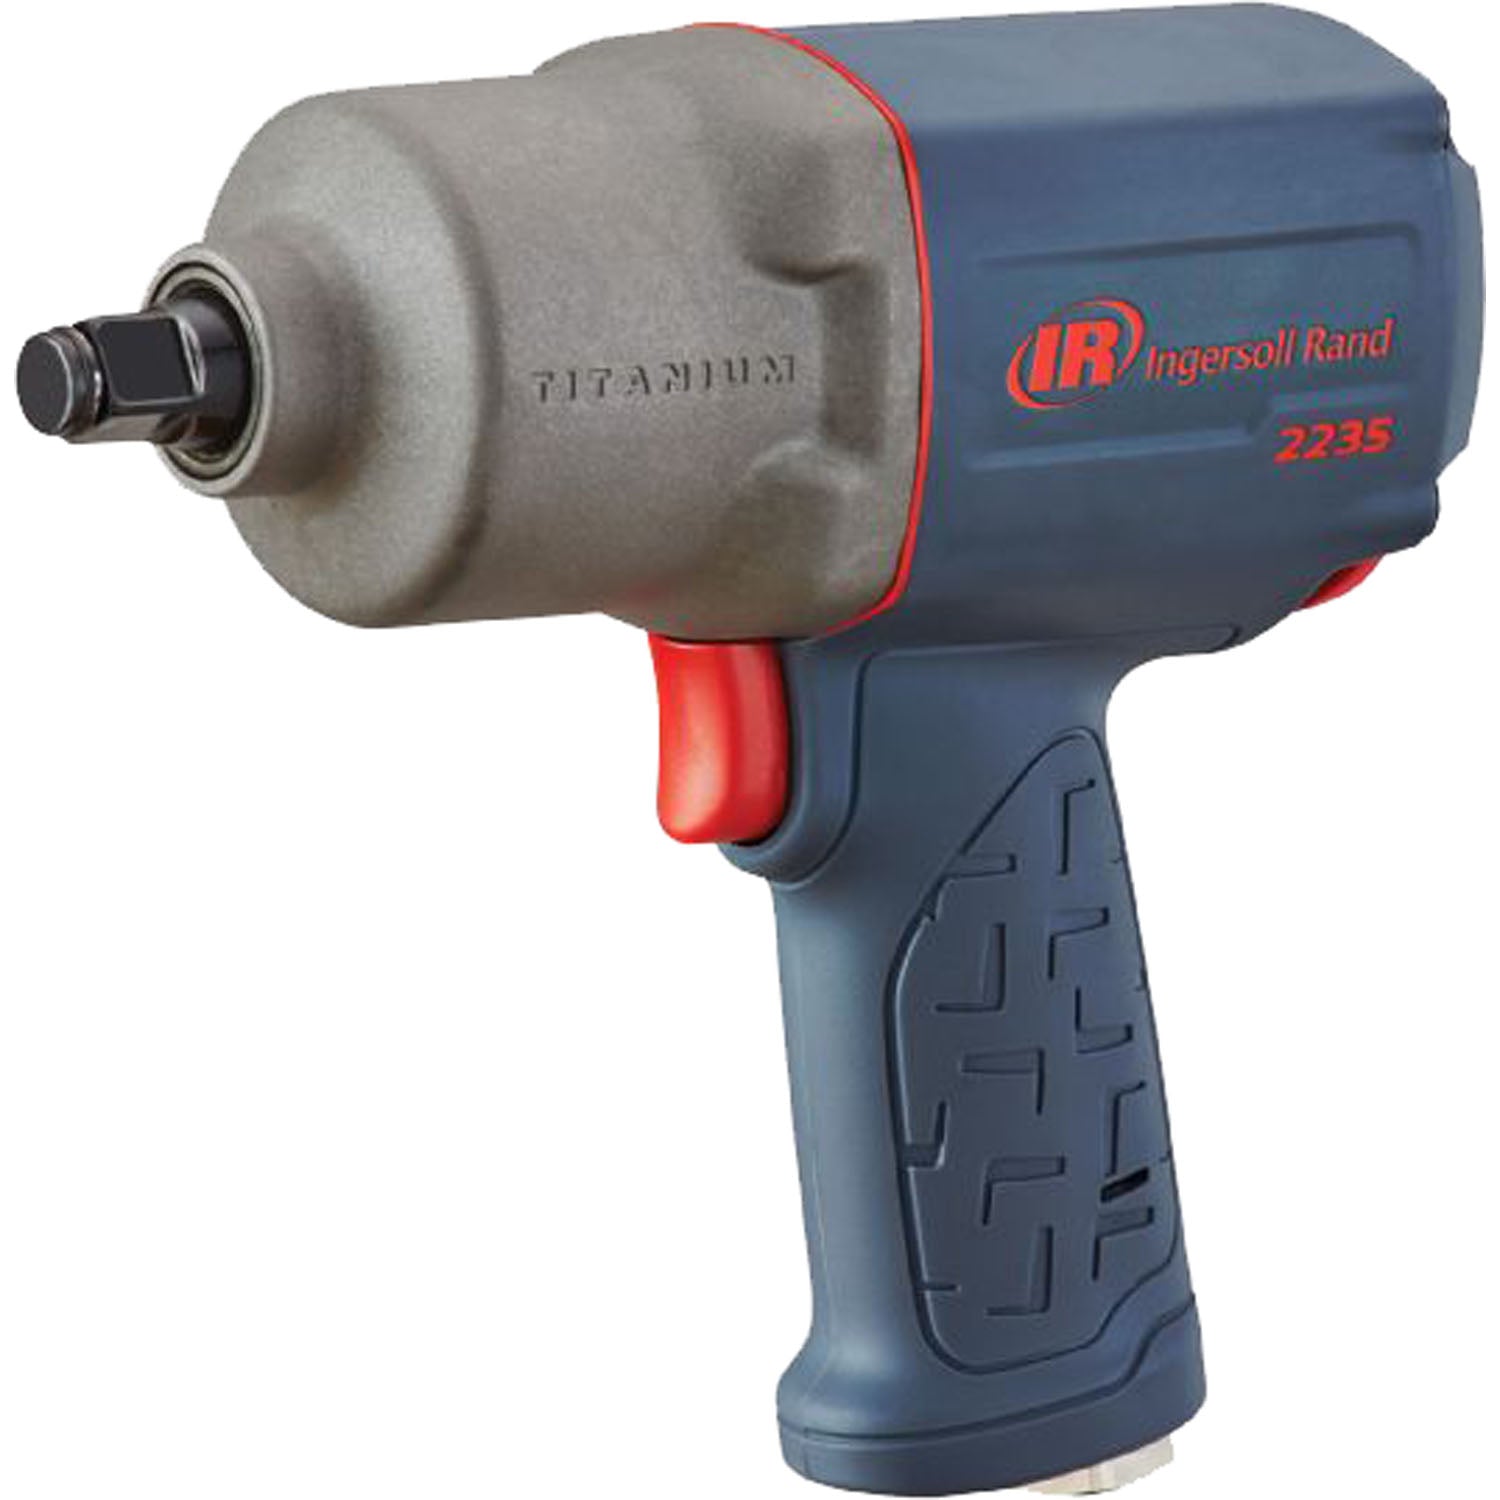 Ingersoll Rand 2235TiMAX 1/2" Short Shank 930 Ft/Lbs Impact Wrench